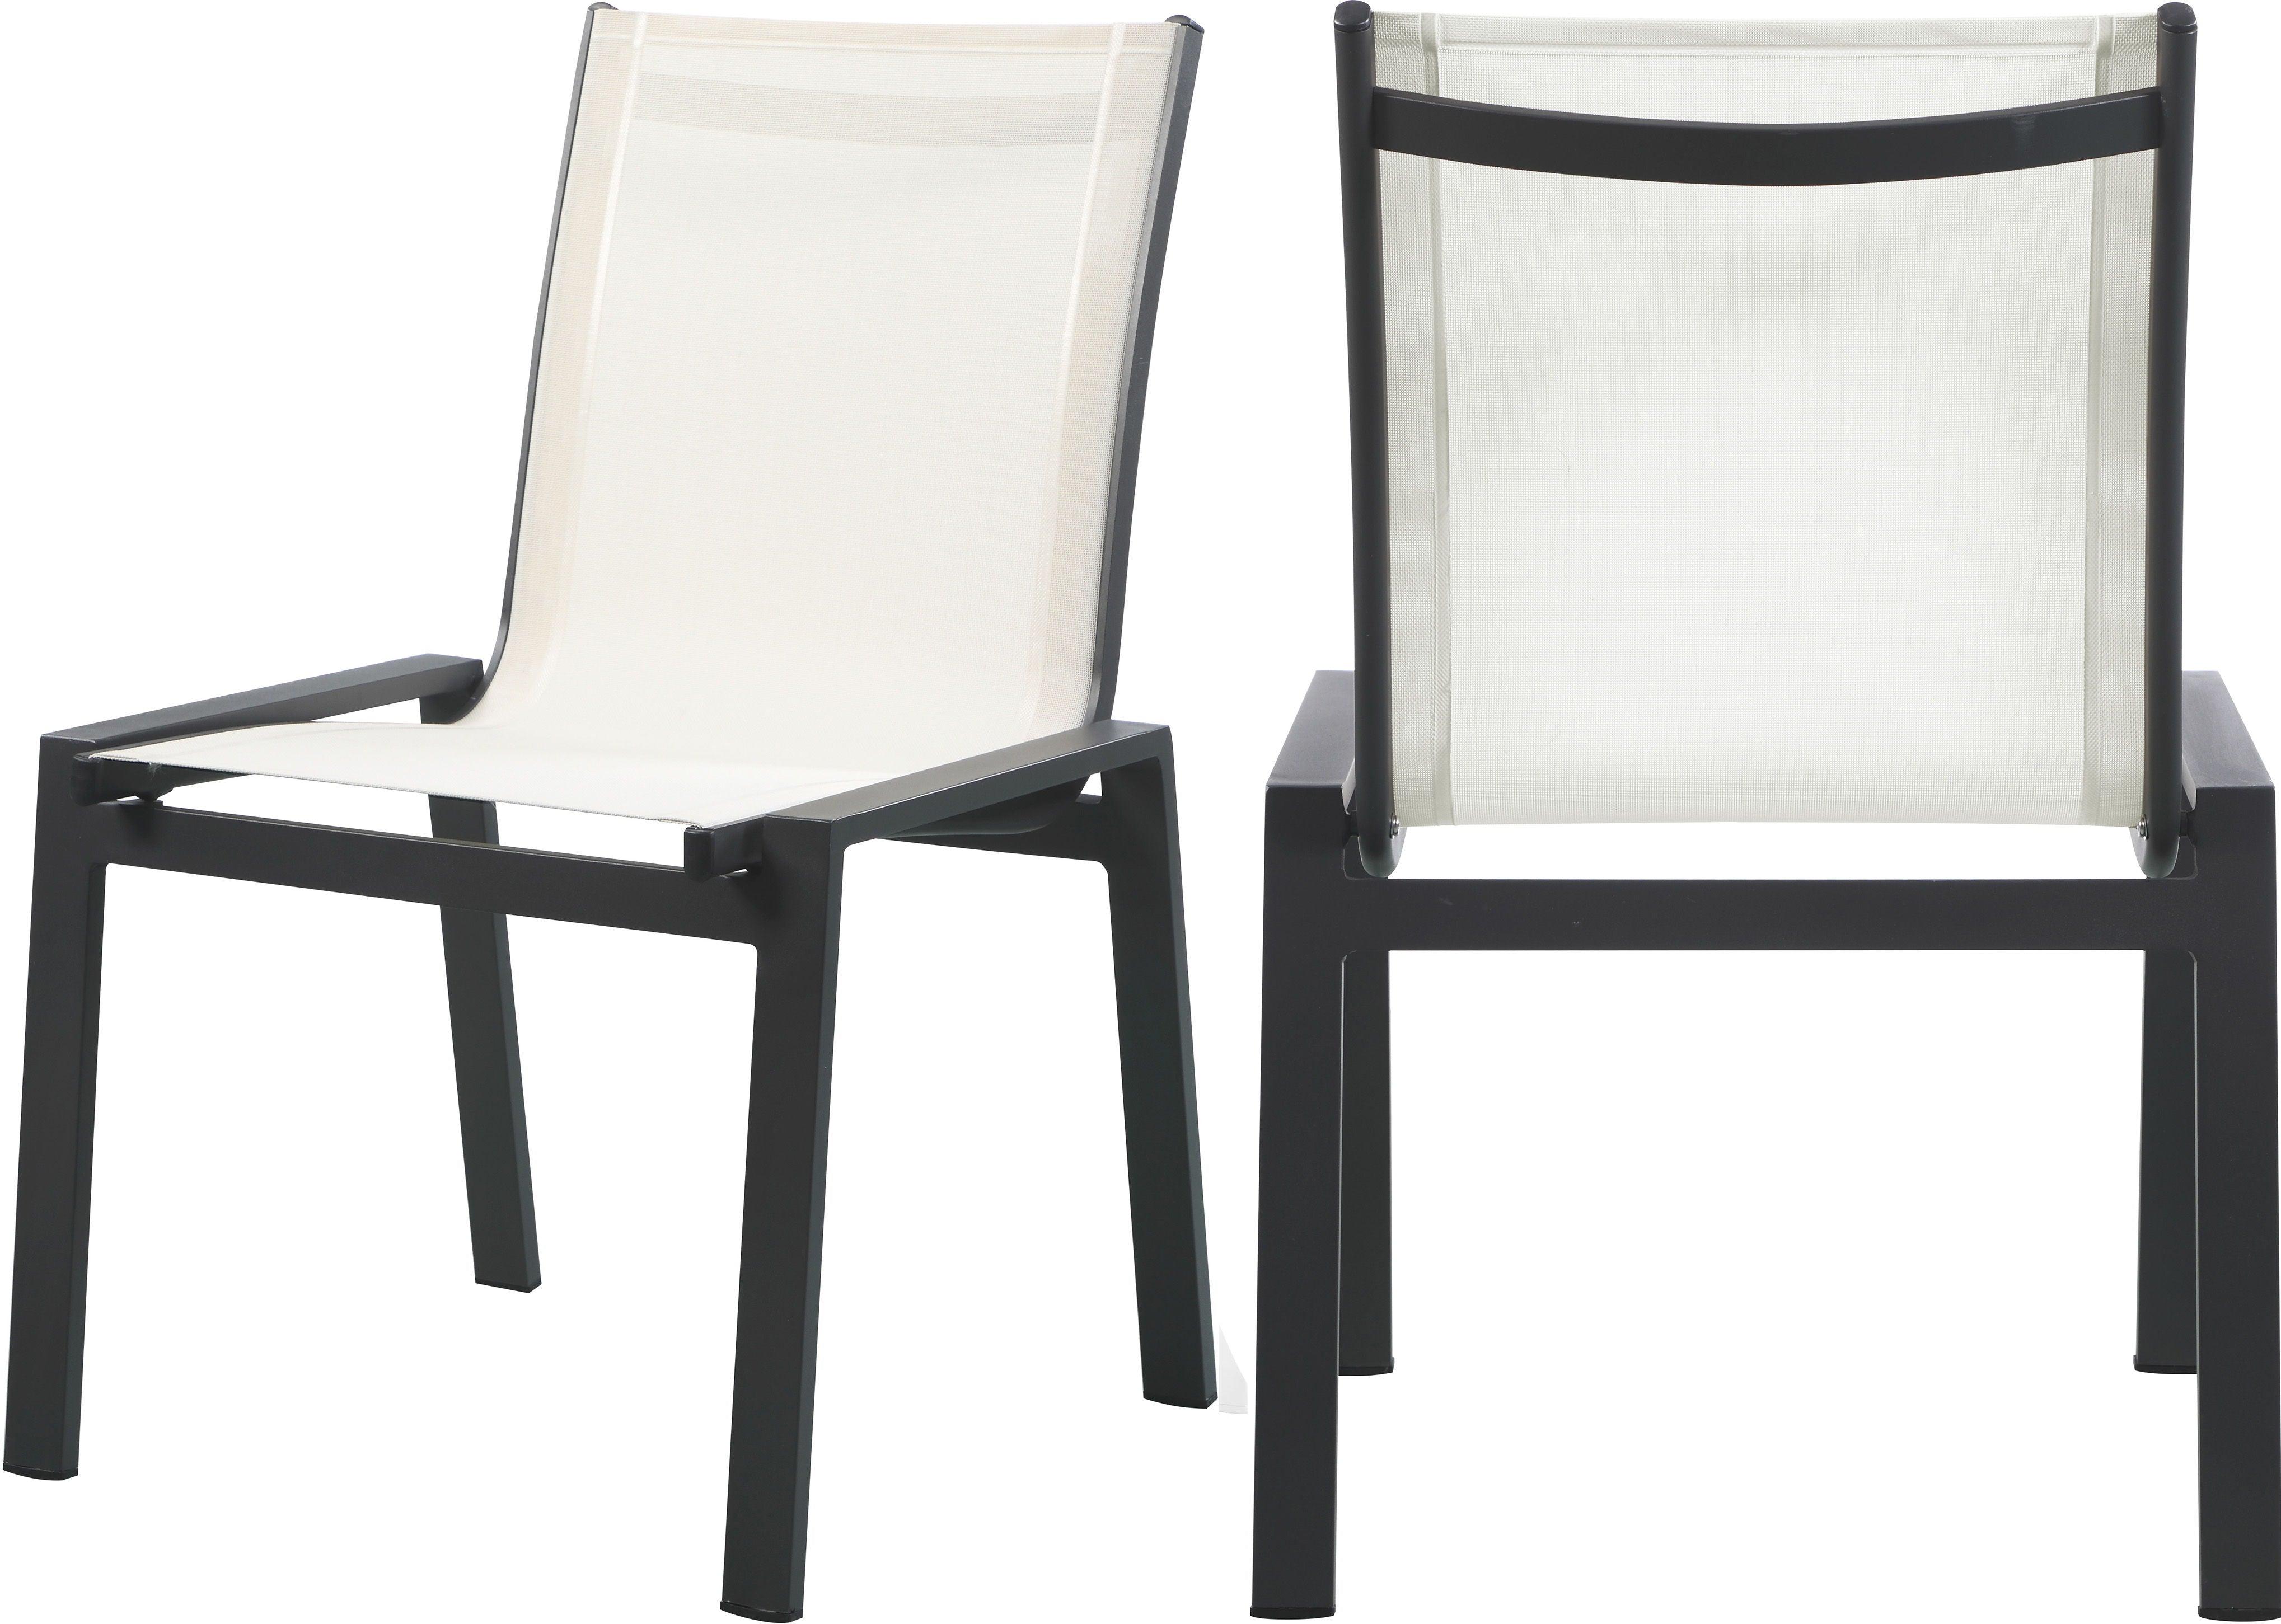 Meridian Furniture - Nizuc - Outdoor Patio Dining Chair (Set of 2) - White - 5th Avenue Furniture